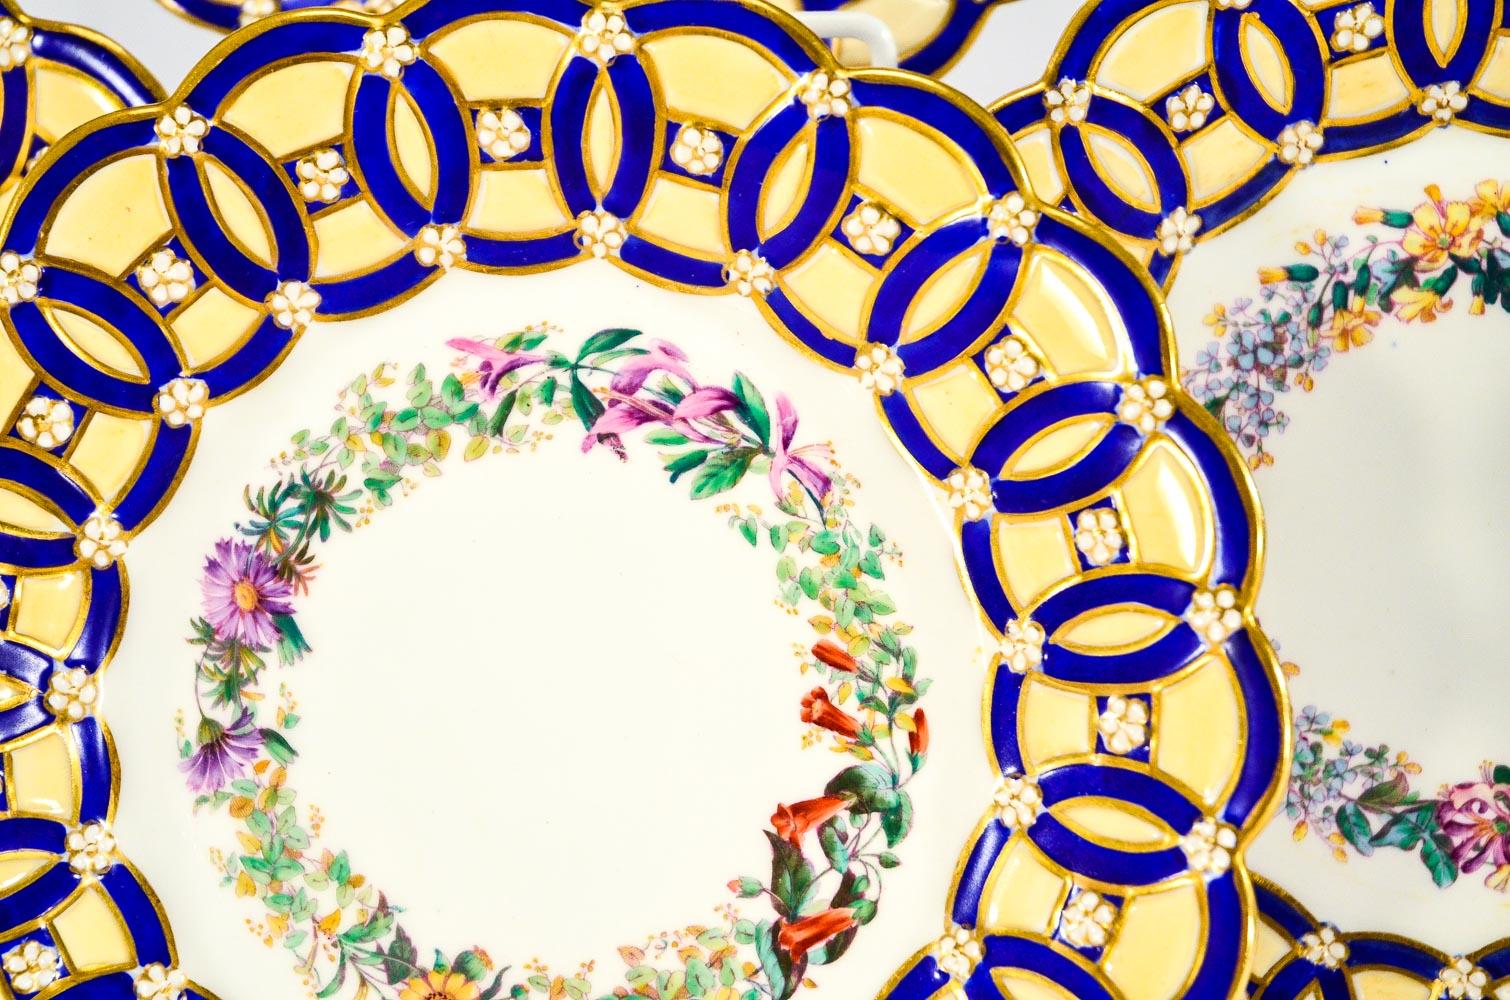 This set of 8 Spode Copelands dessert plates are perfect for a dessert course at an intimate dinner and also likely to be used as display or cabinet plates as they are true works of art and unique.
Each plate has different hand painted flowers